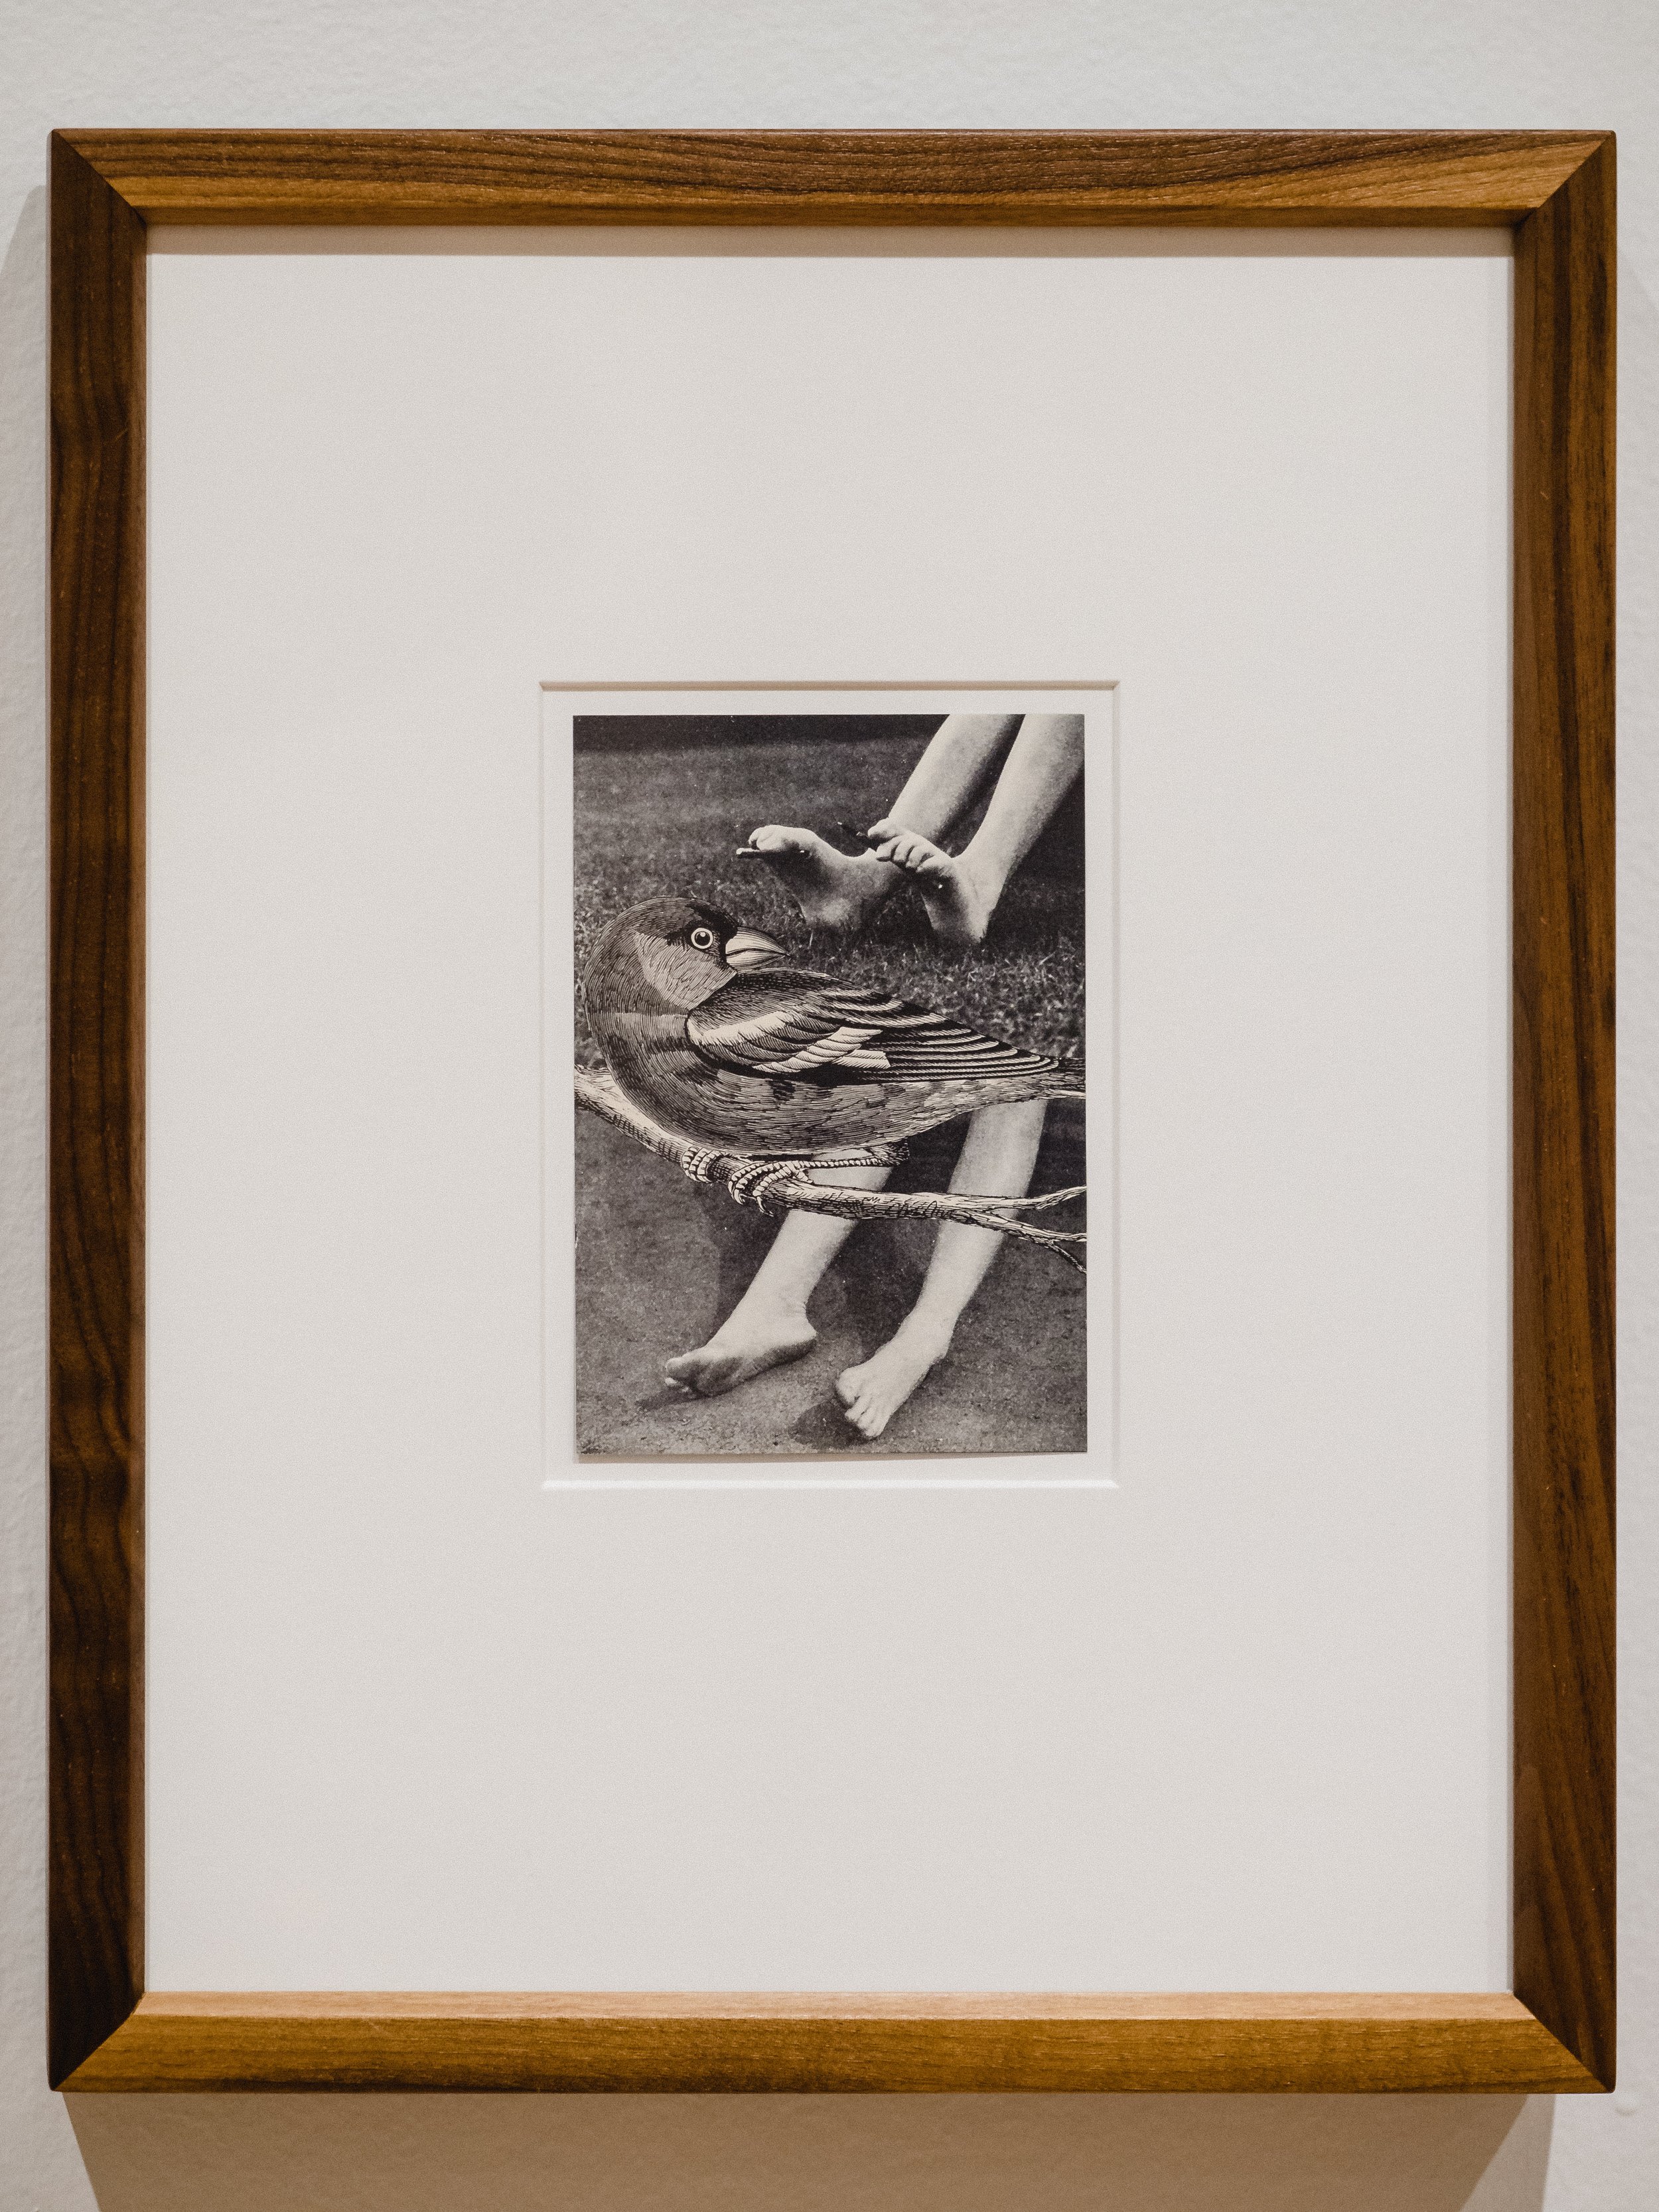  Marcia Herscovitz, Seven of Ten Collages (from S.M.S. No. 2), 1968, photocollage on paper, edition of 40. Purchase, George Taylor Richardson Memorial Fund, 1989. Photo: Tim Forbes